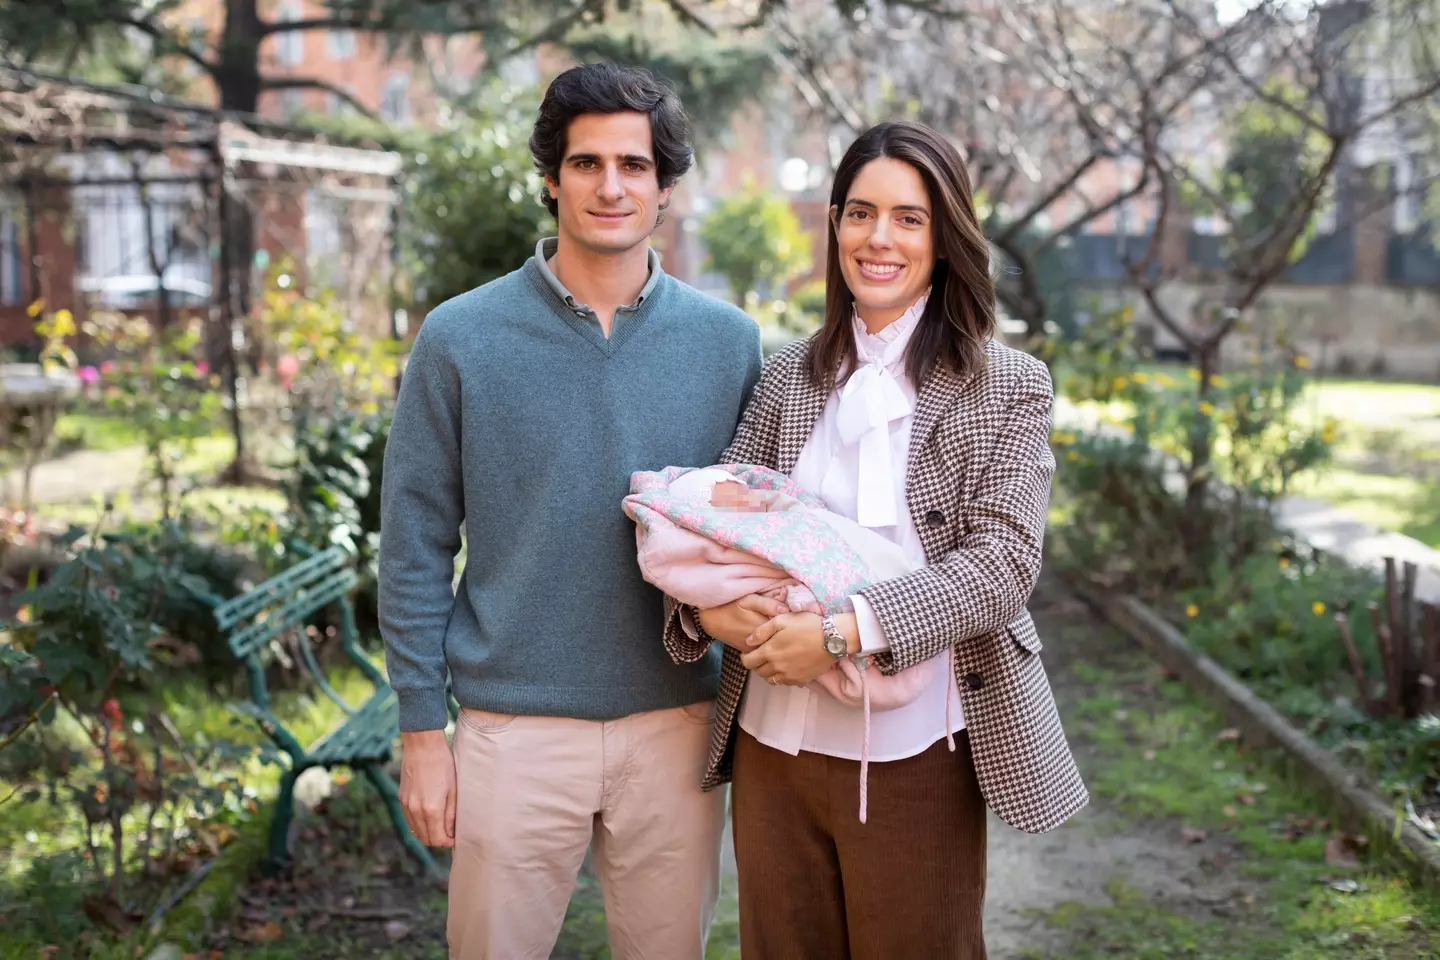 Fernando Fitz-James Stuart and wife Sofia Palazuelo welcomed their second daughter in January.